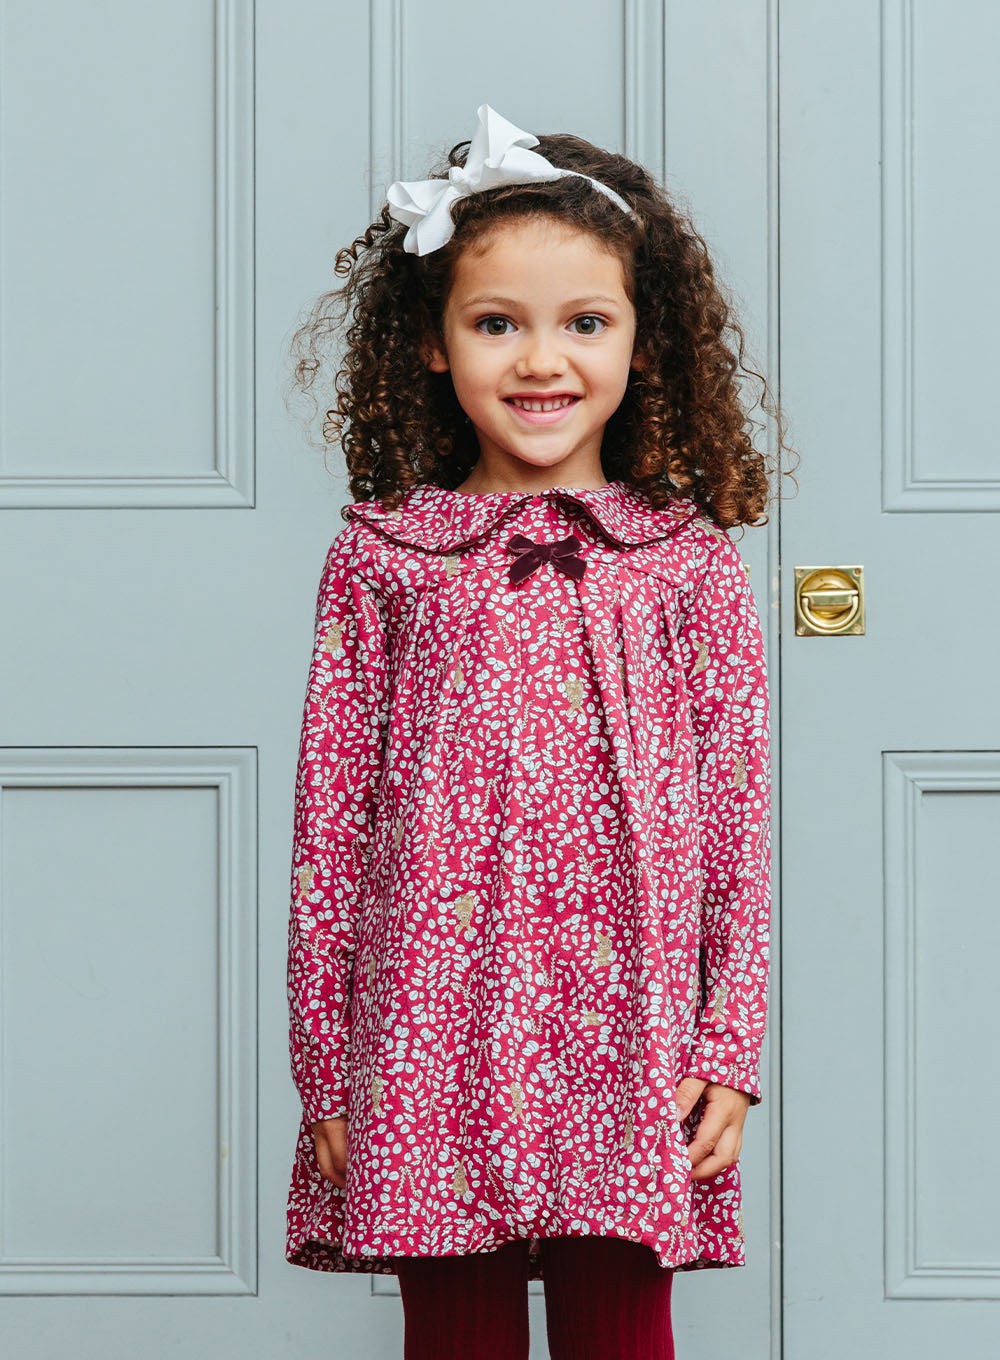 Confiture Girls' Woodland Bunny Jersey Dress in Berry